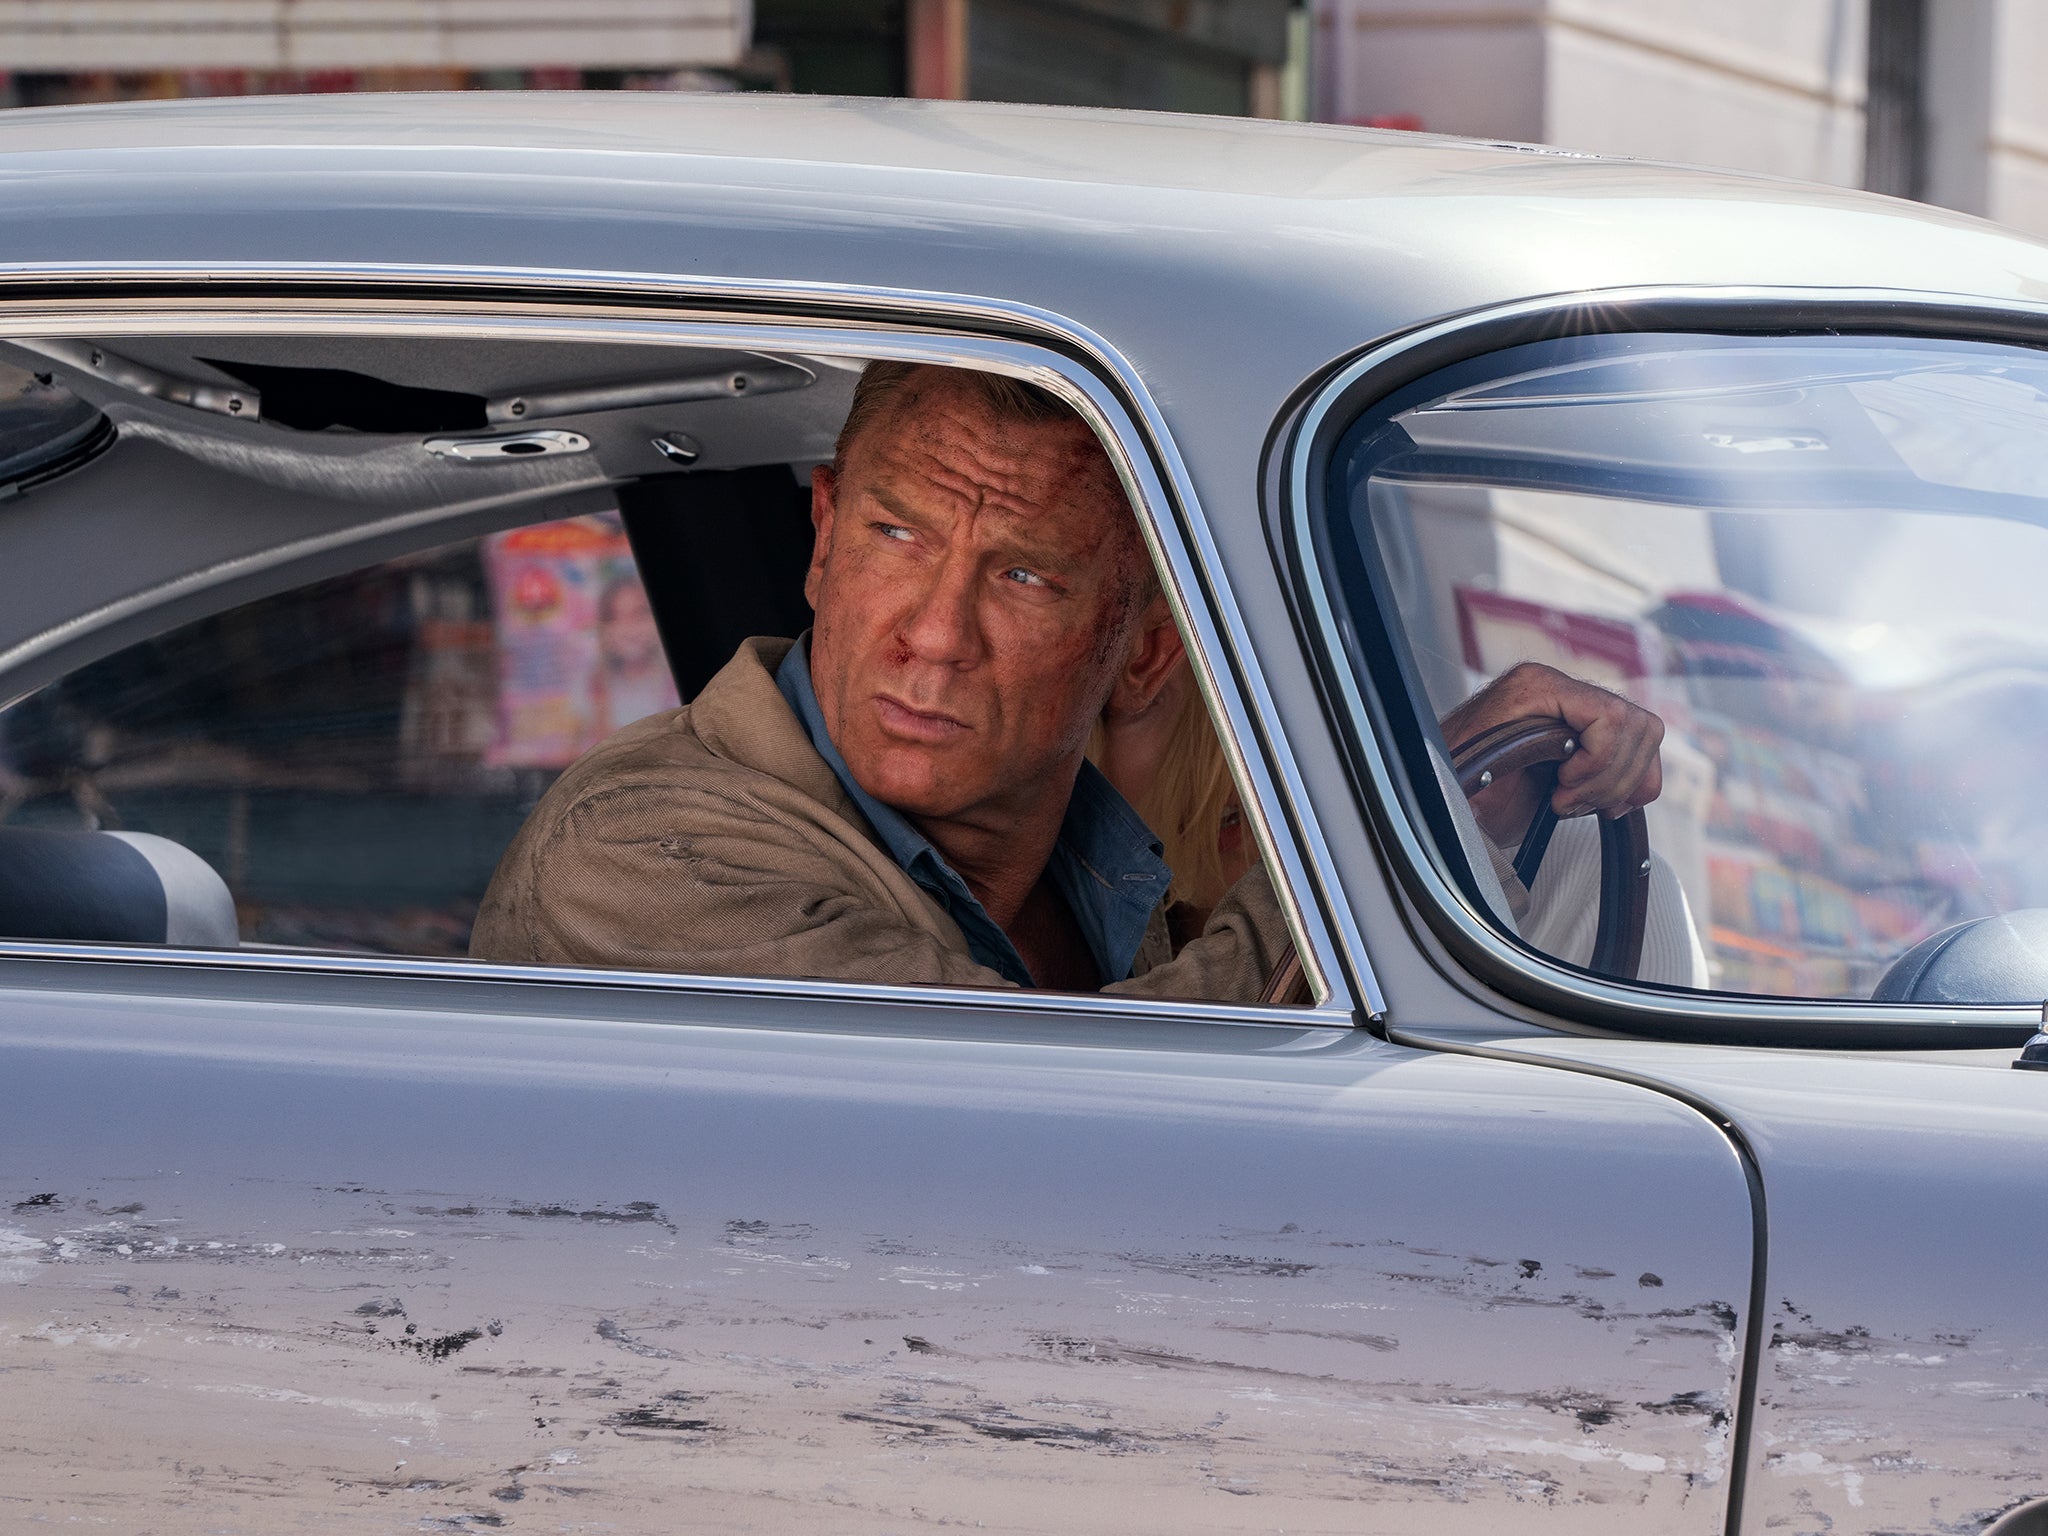 Daniel Craig drives through Italy in a scene from his final Bond film, ‘No Time to Die'